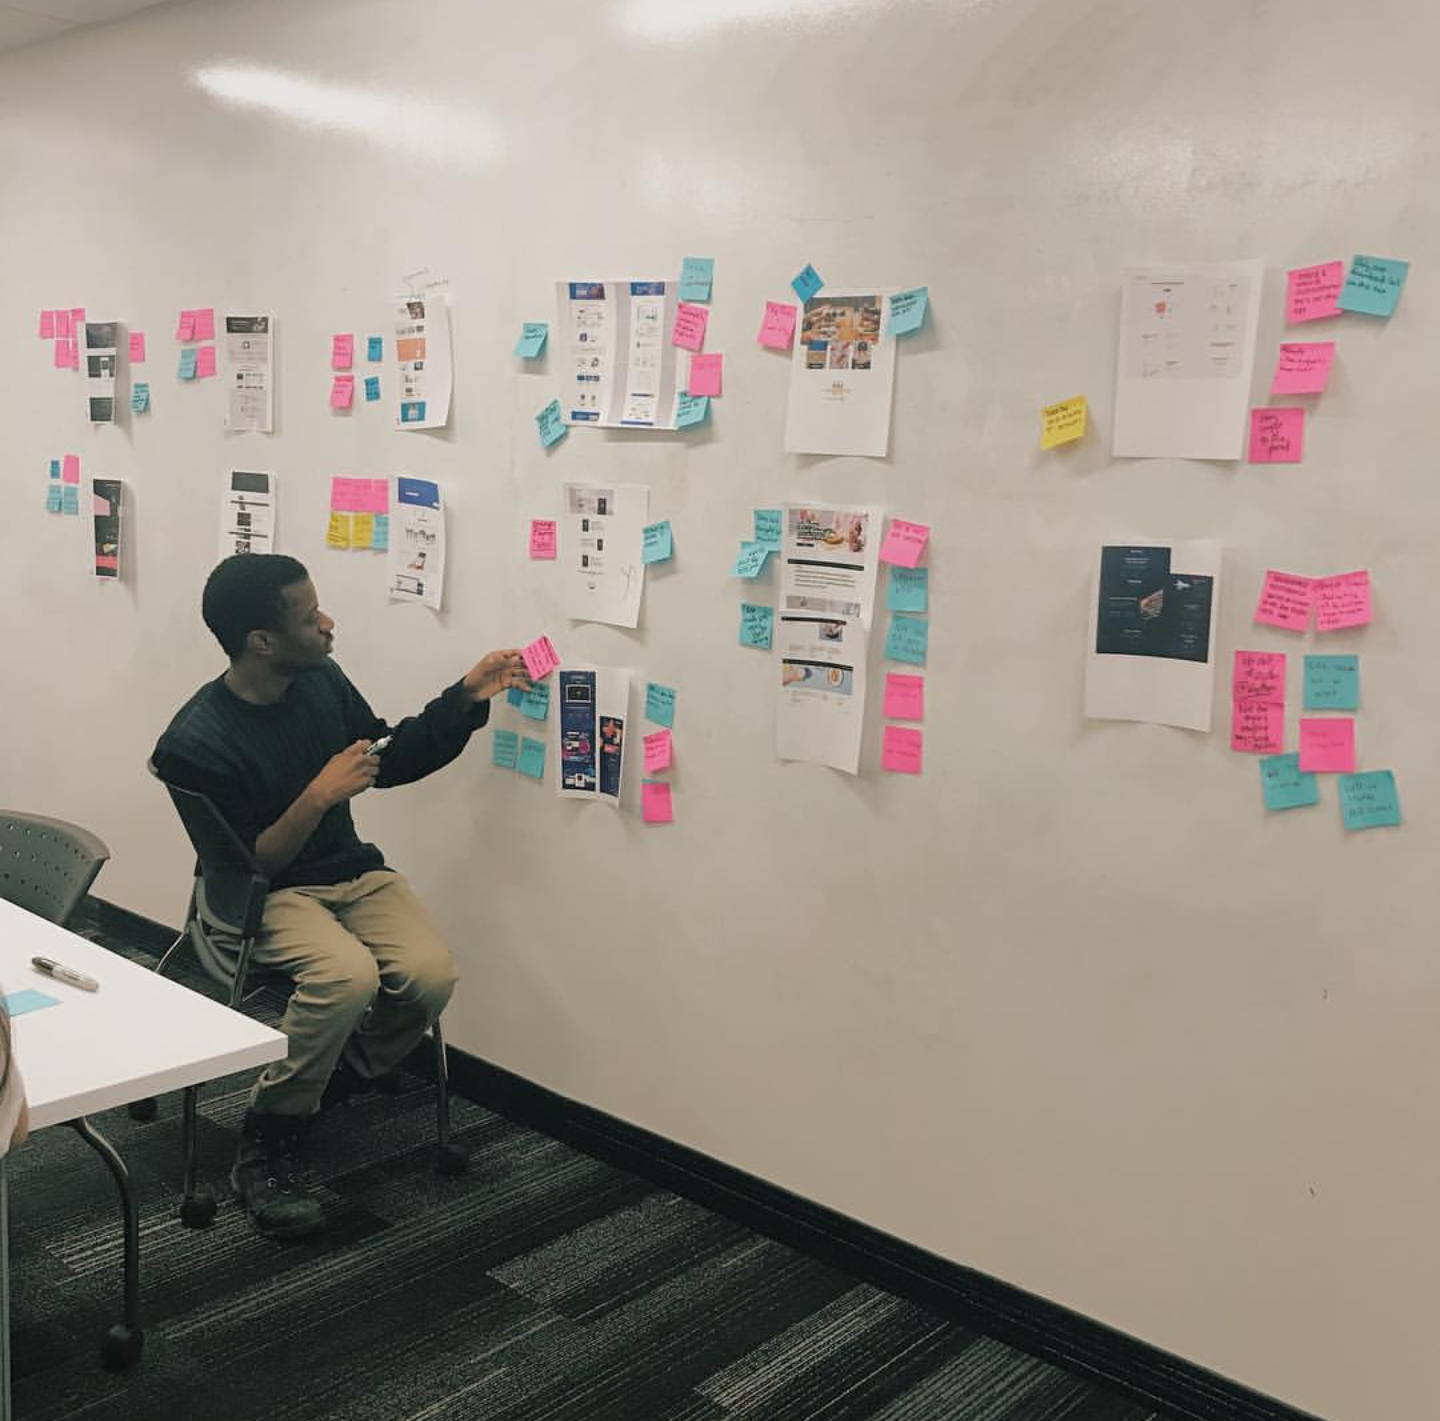  Mackenzie Derival working on a UX project in a design studio setting.